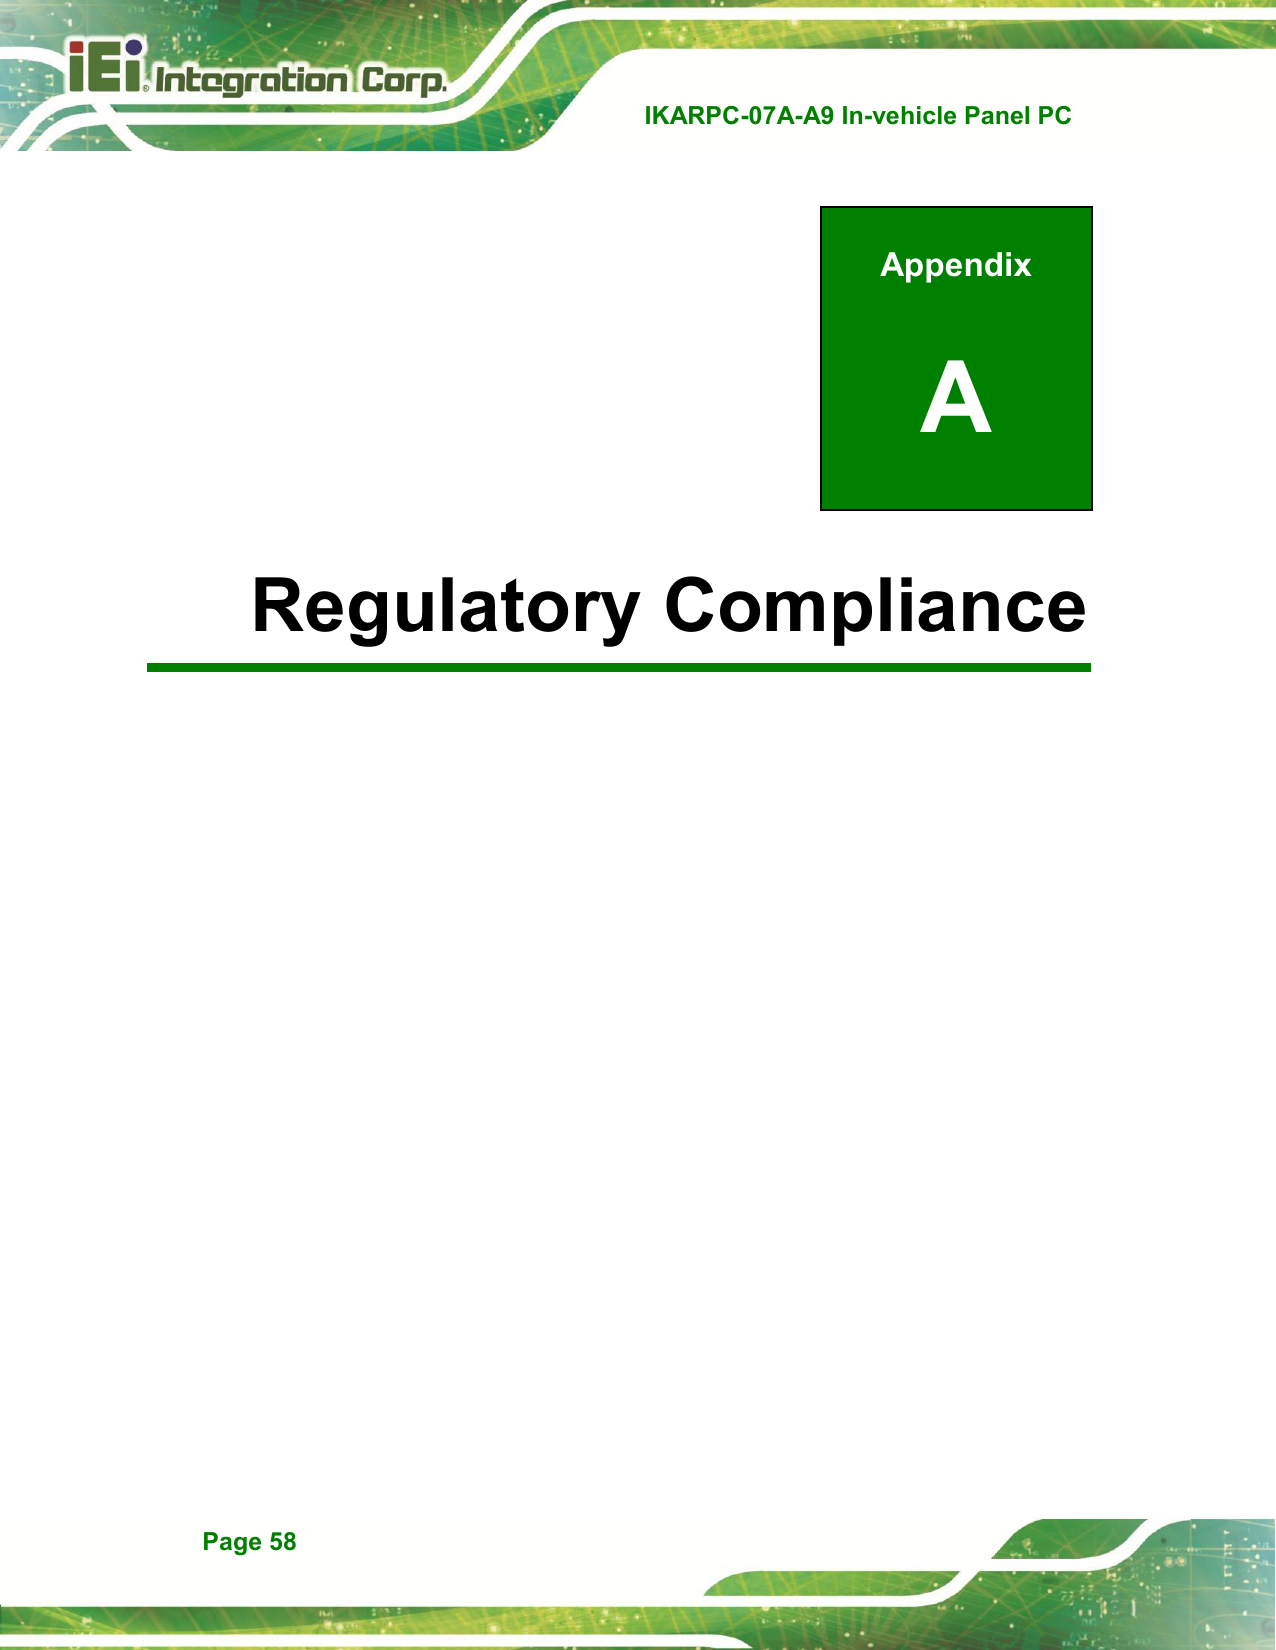   IKARPC-07A-A9 In-vehicle Panel PC  Page 58 Appendix A A Regulatory Compliance 